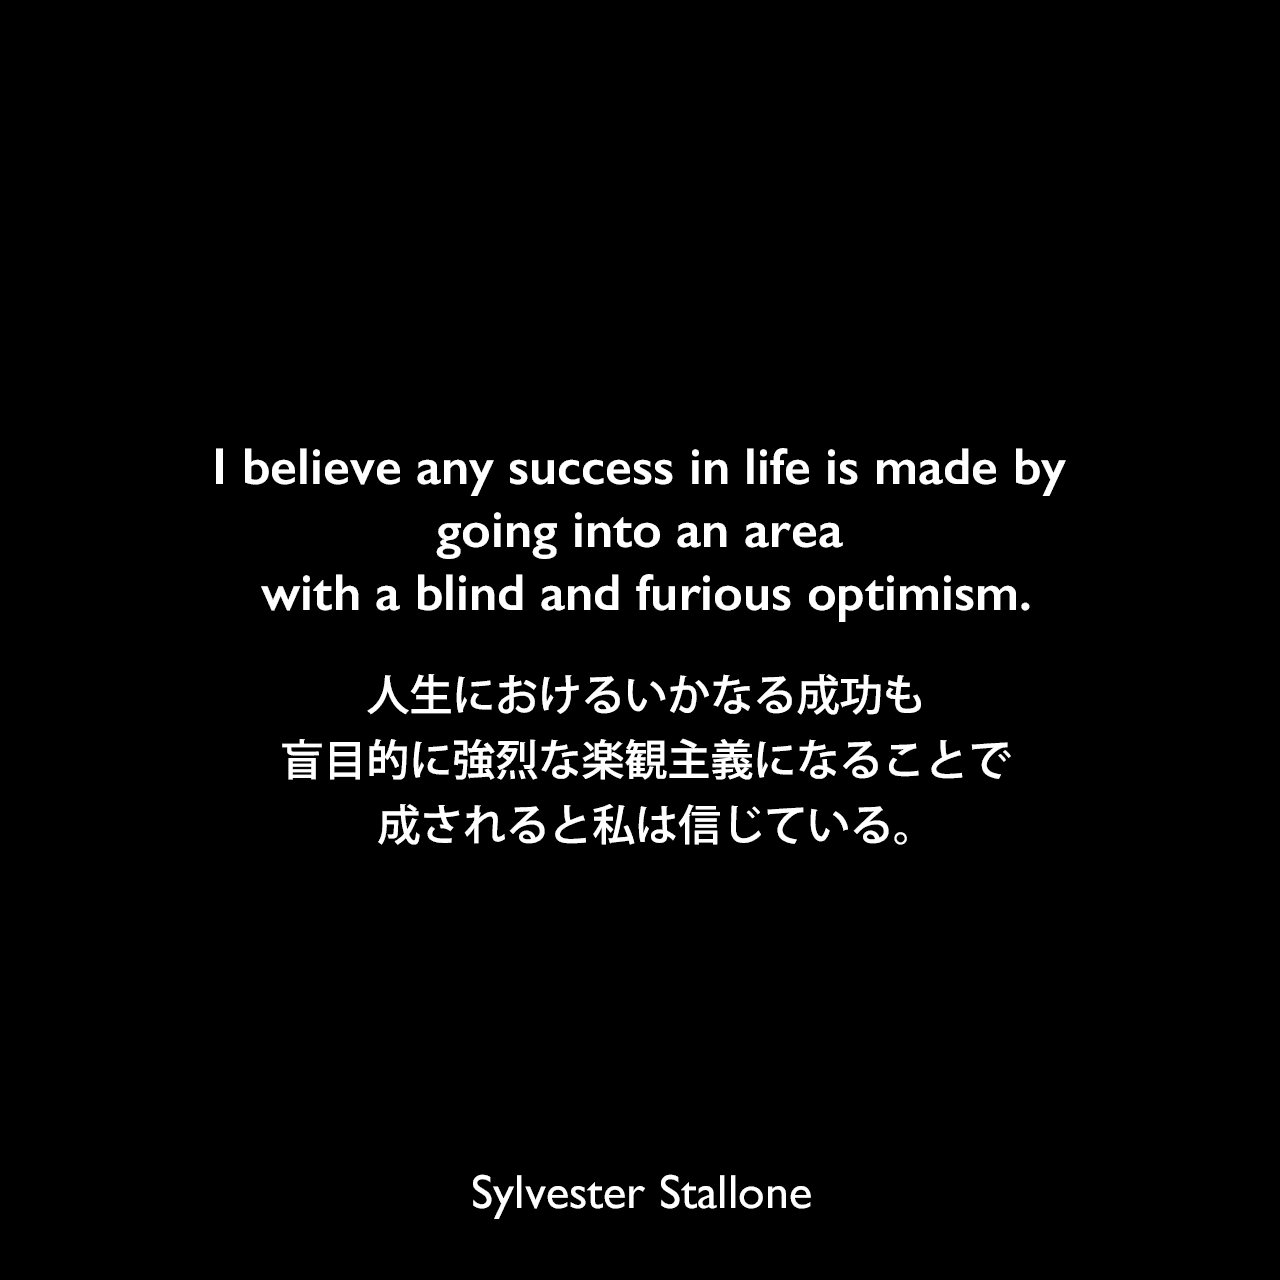 I believe any success in life is made by going into an area with a blind and furious optimism.人生におけるいかなる成功も、盲目的に強烈な楽観主義になることで成されると私は信じている。Sylvester Stallone